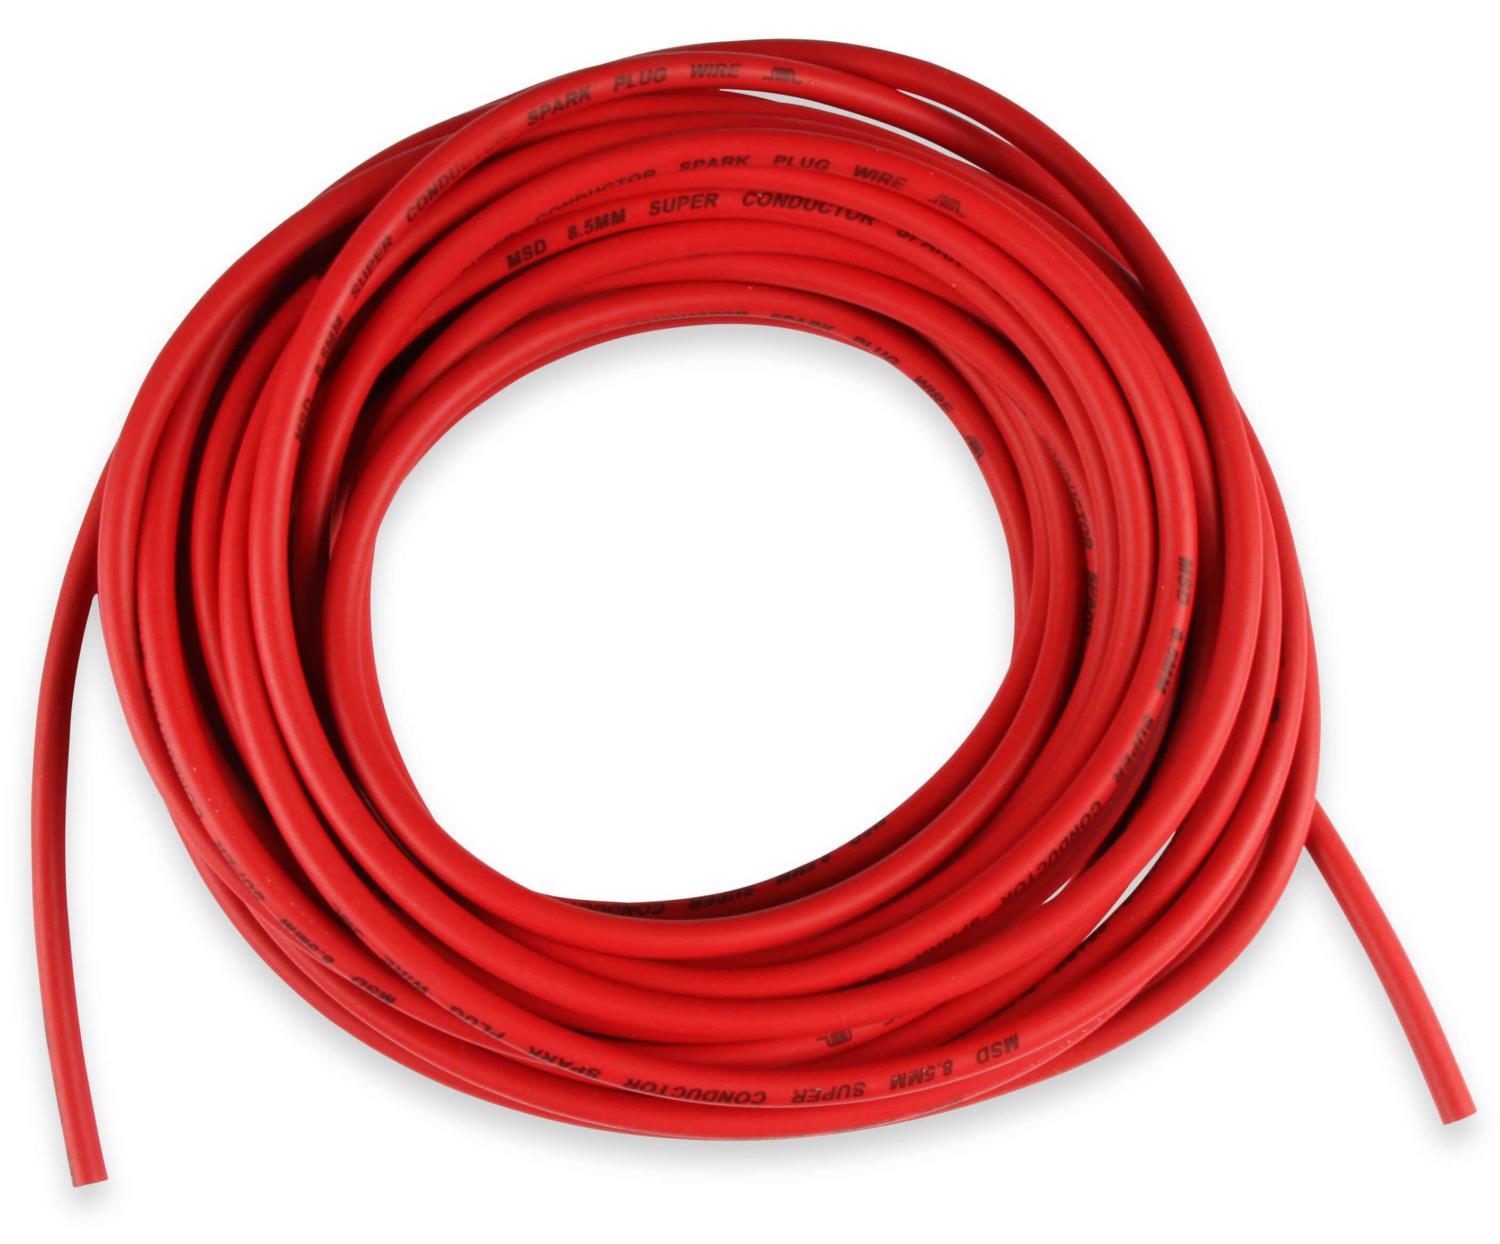 Super Conductor 8.5mm Spark Plug Wire - Red - 50-Ft. Roll